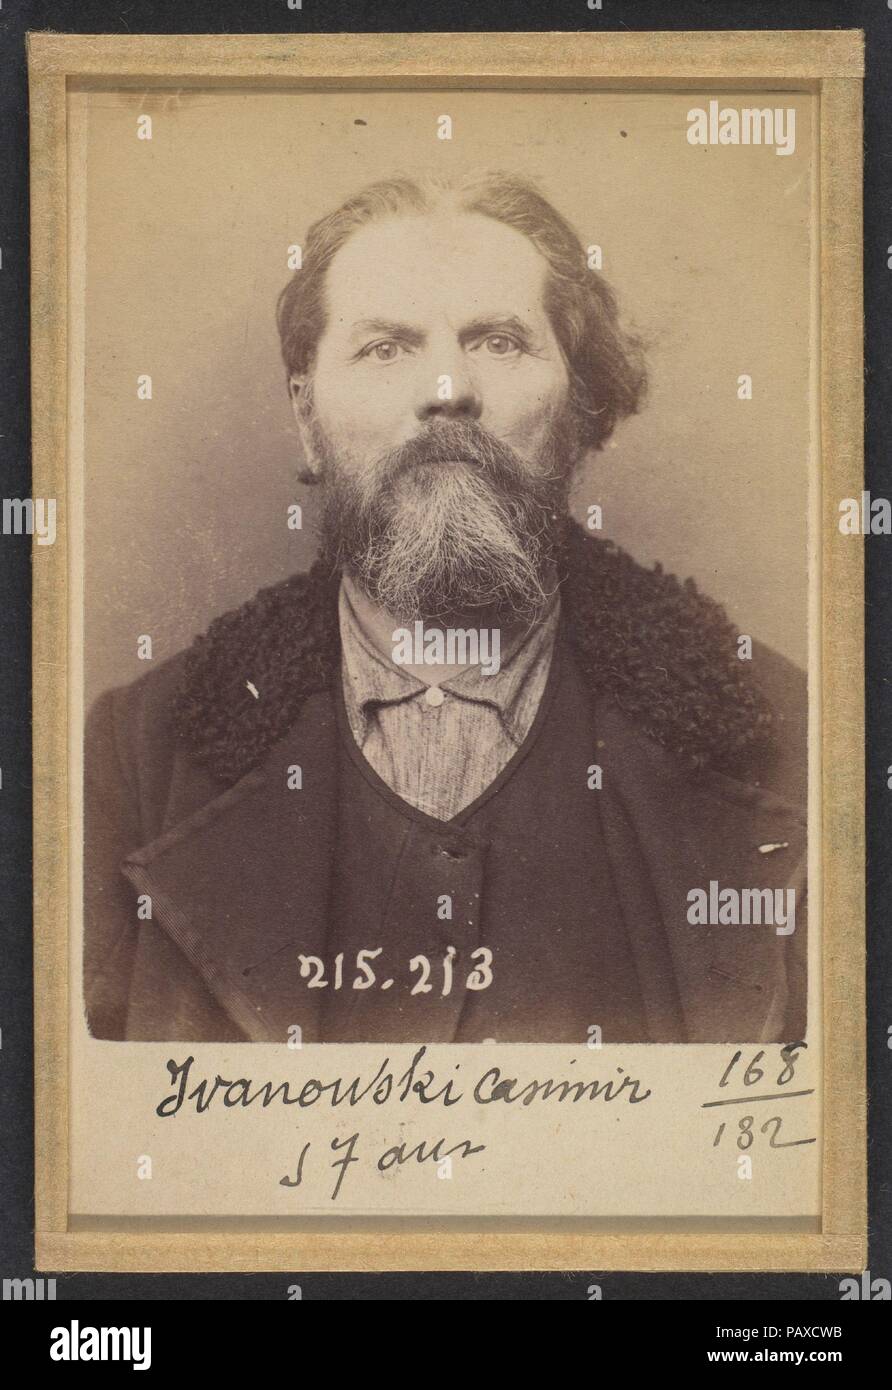 Iv(w)anowski. Casimir. 57 ans, né à Chalon-sur-Saône (Saône & Loire). Mécanicien. Anarchiste. 6/3/94. Artist: Alphonse Bertillon (French, 1853-1914). Dimensions: 10.5 x 7 x 0.5 cm (4 1/8 x 2 3/4 x 3/16 in.) each. Date: 1894.  Born into a distinguished family of scientists and statisticians, Bertillon began his career as a clerk in the Identification Bureau of the Paris Prefecture of Police in 1879. Tasked with maintaining reliable police records of offenders, he developed the first modern system of criminal identification. The system, which became known as Bertillonage, had three components: a Stock Photo